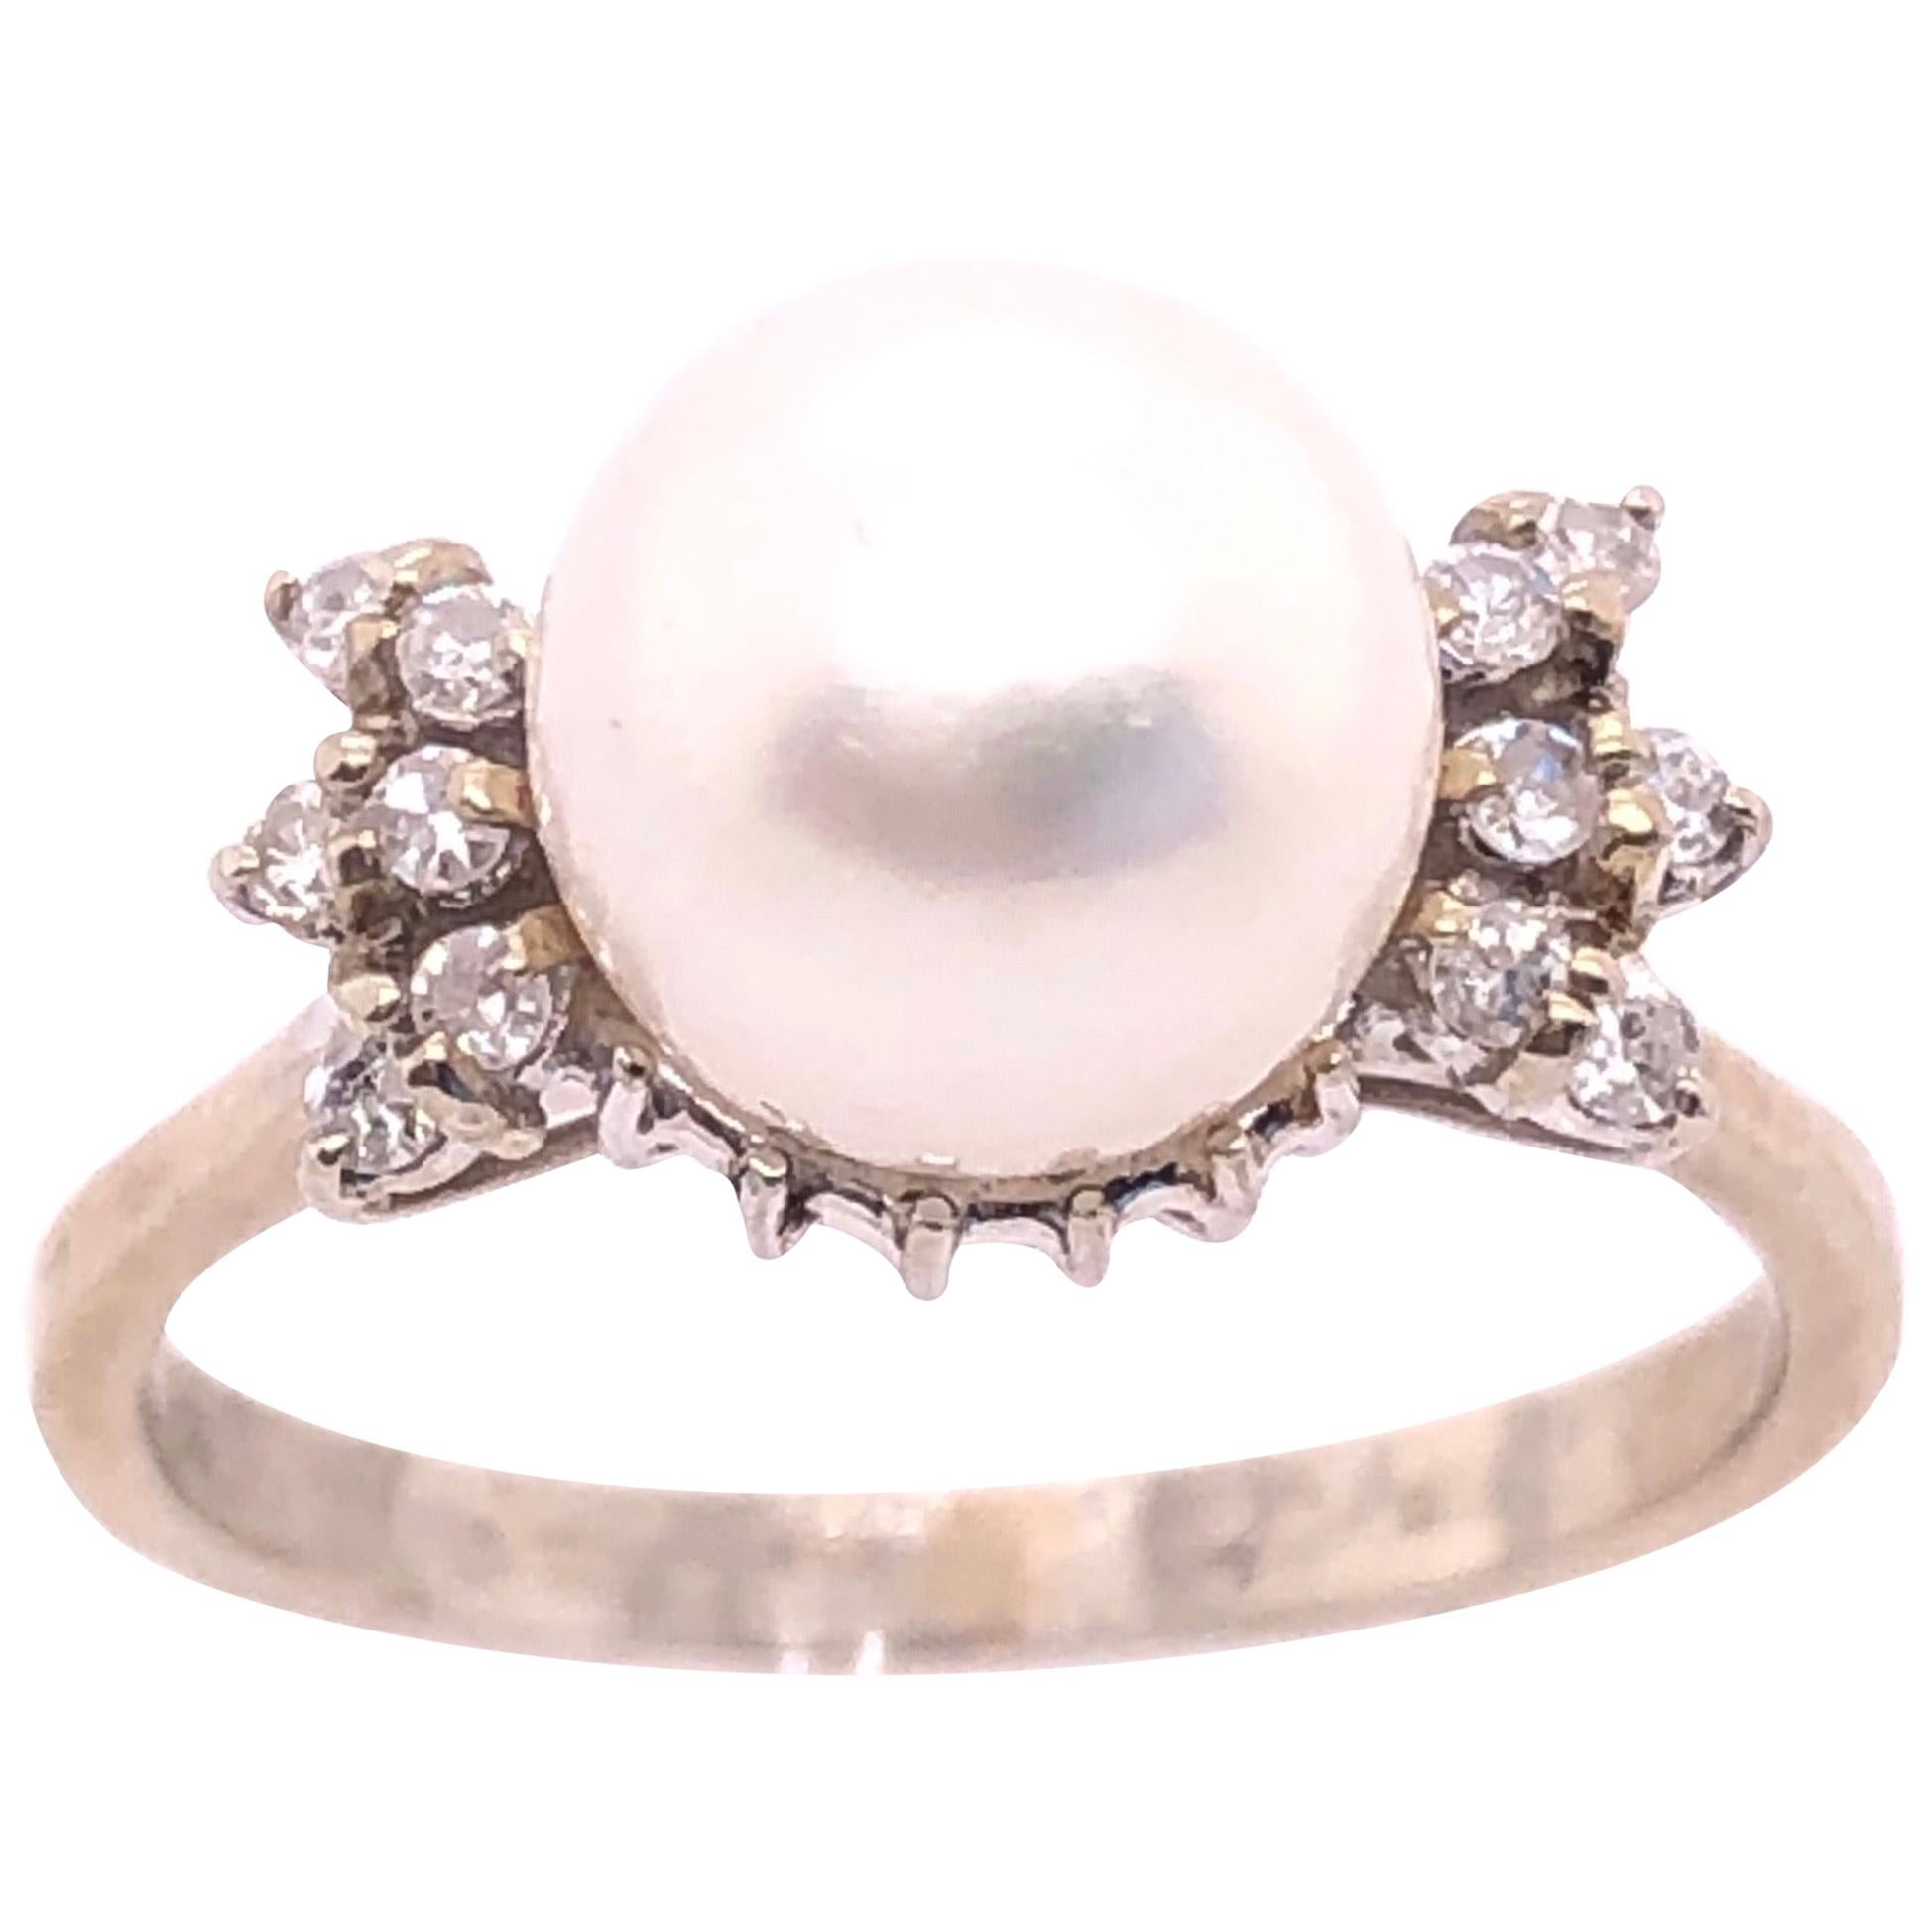 14 Karat White Gold Pearl Solitaire with Diamond Accents Ring